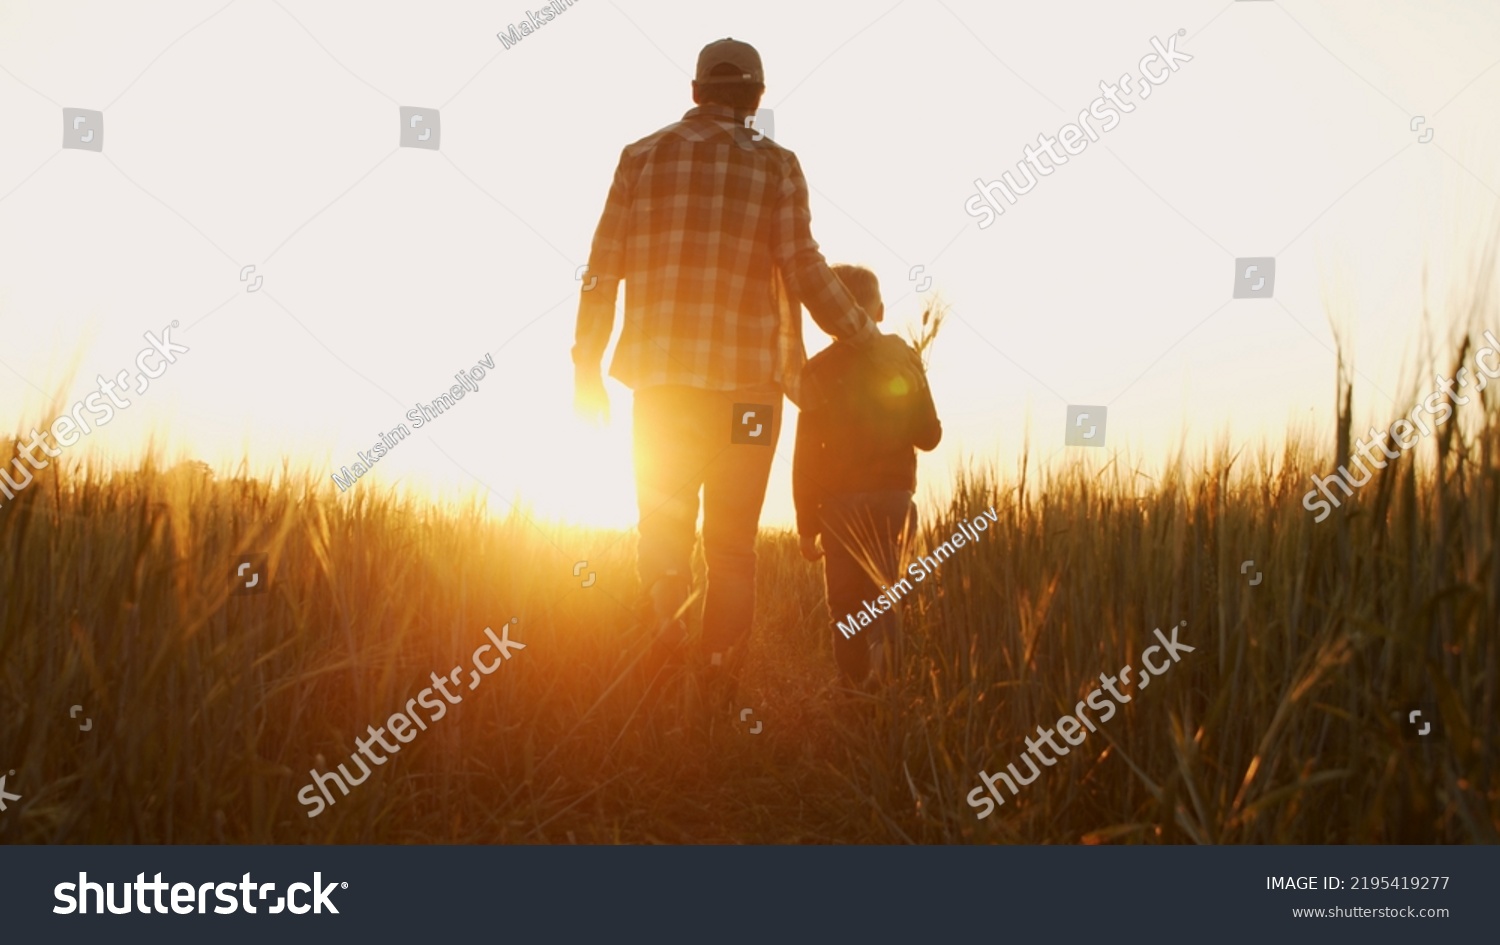 Farmer and his son in front of a sunset agricultural landscape. Man and a boy in a countryside field. Fatherhood, country life, farming and country lifestyle. #2195419277